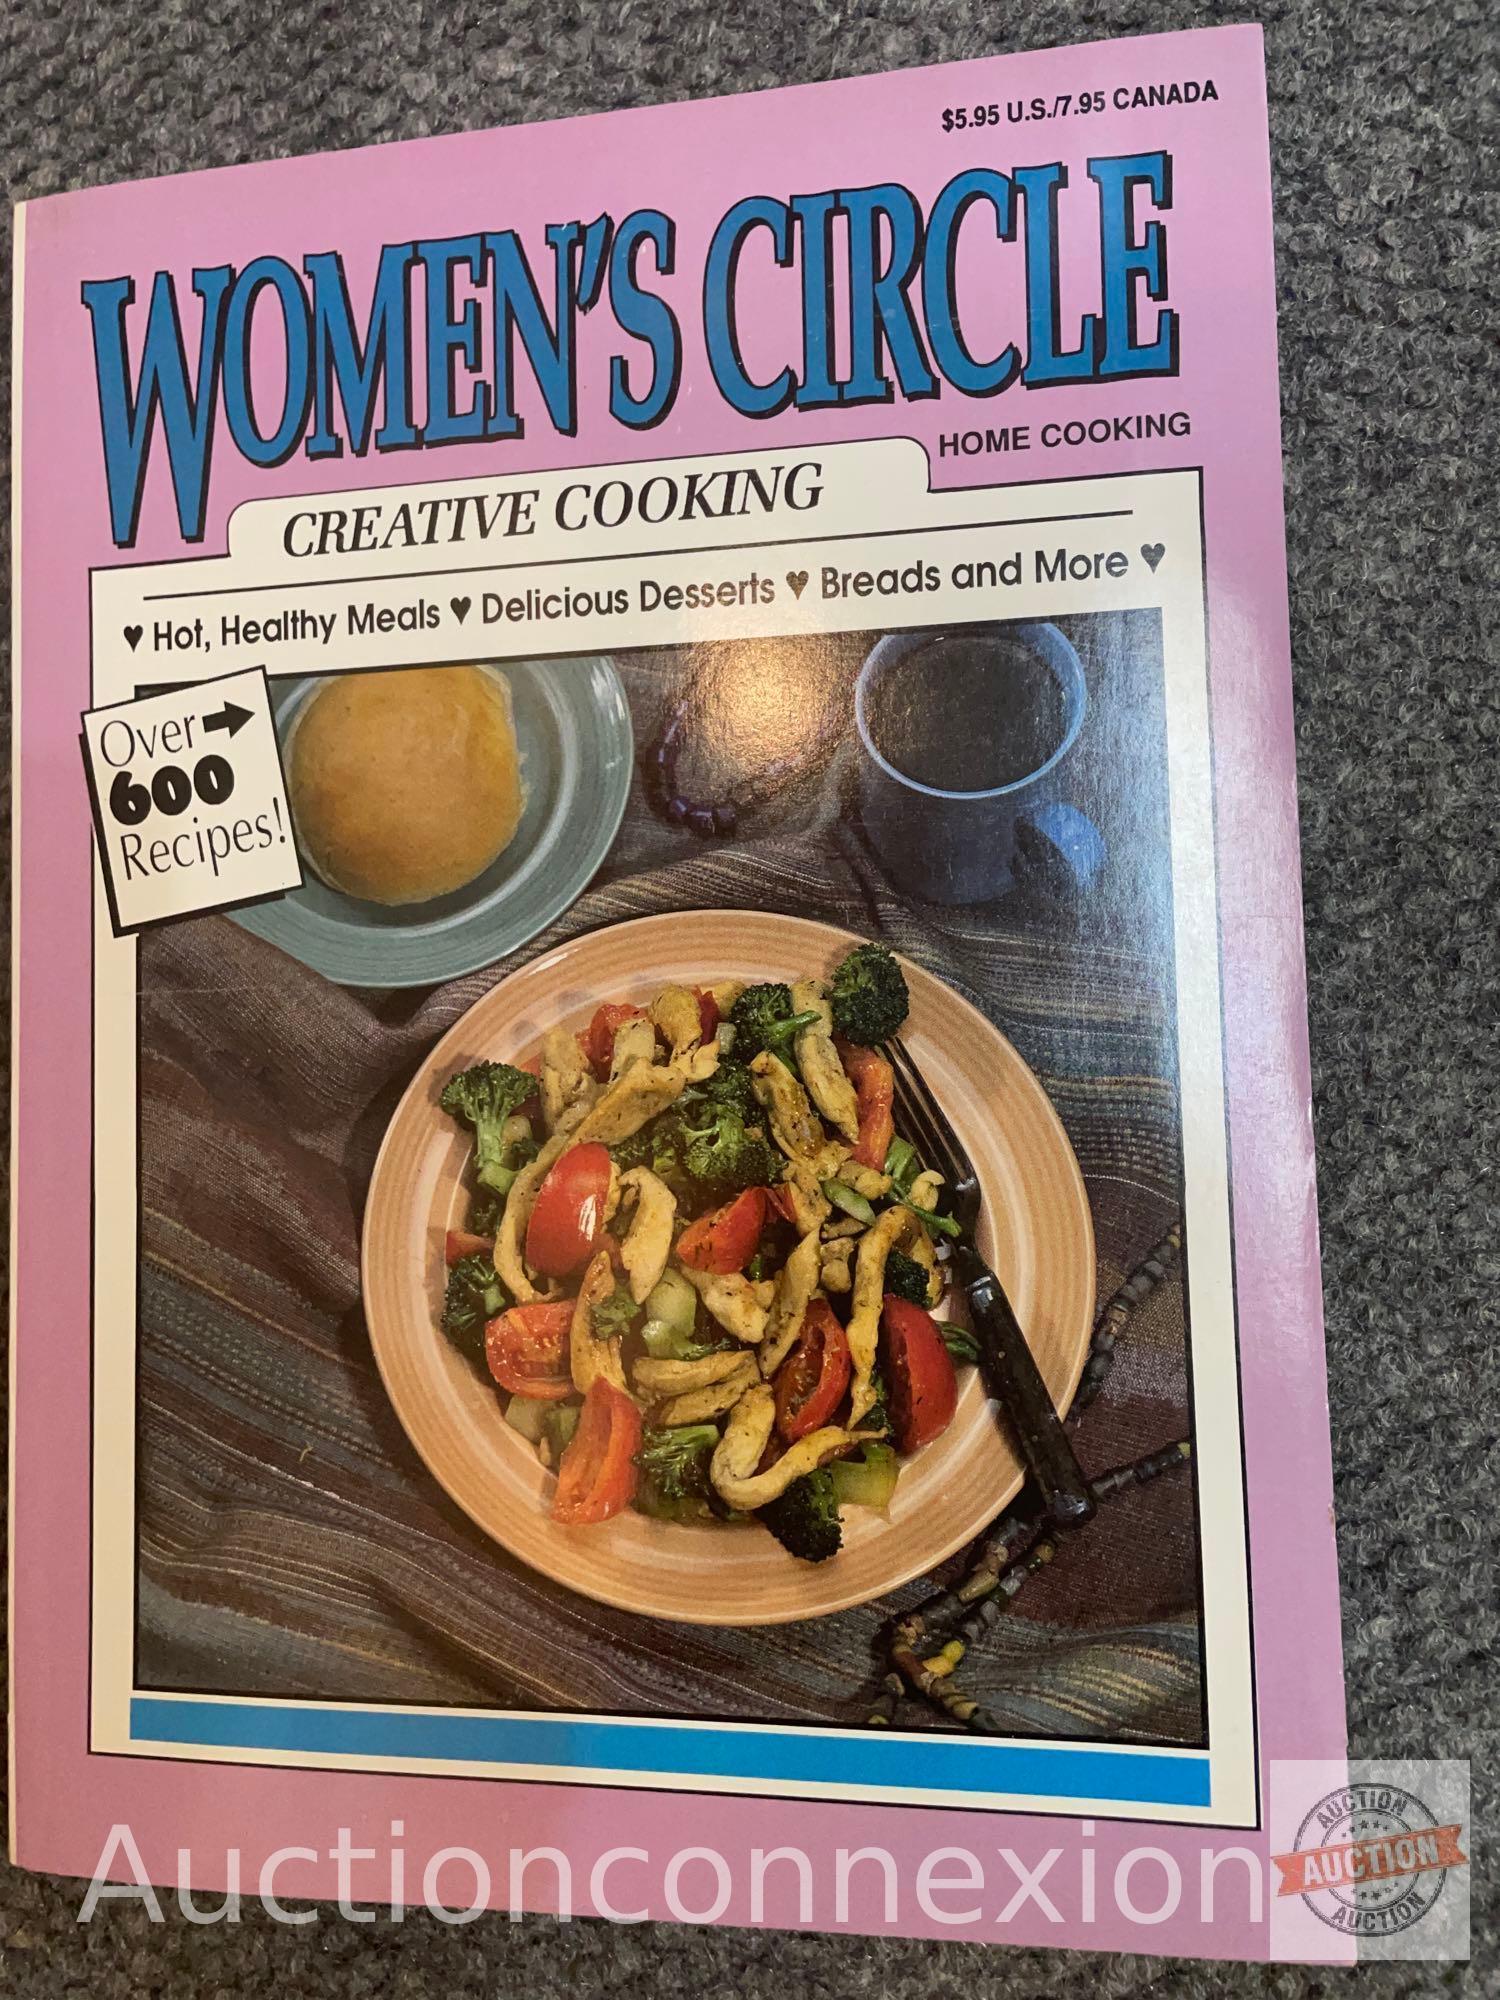 Cookbooks - 6 Women's Circle "Home Cooking"